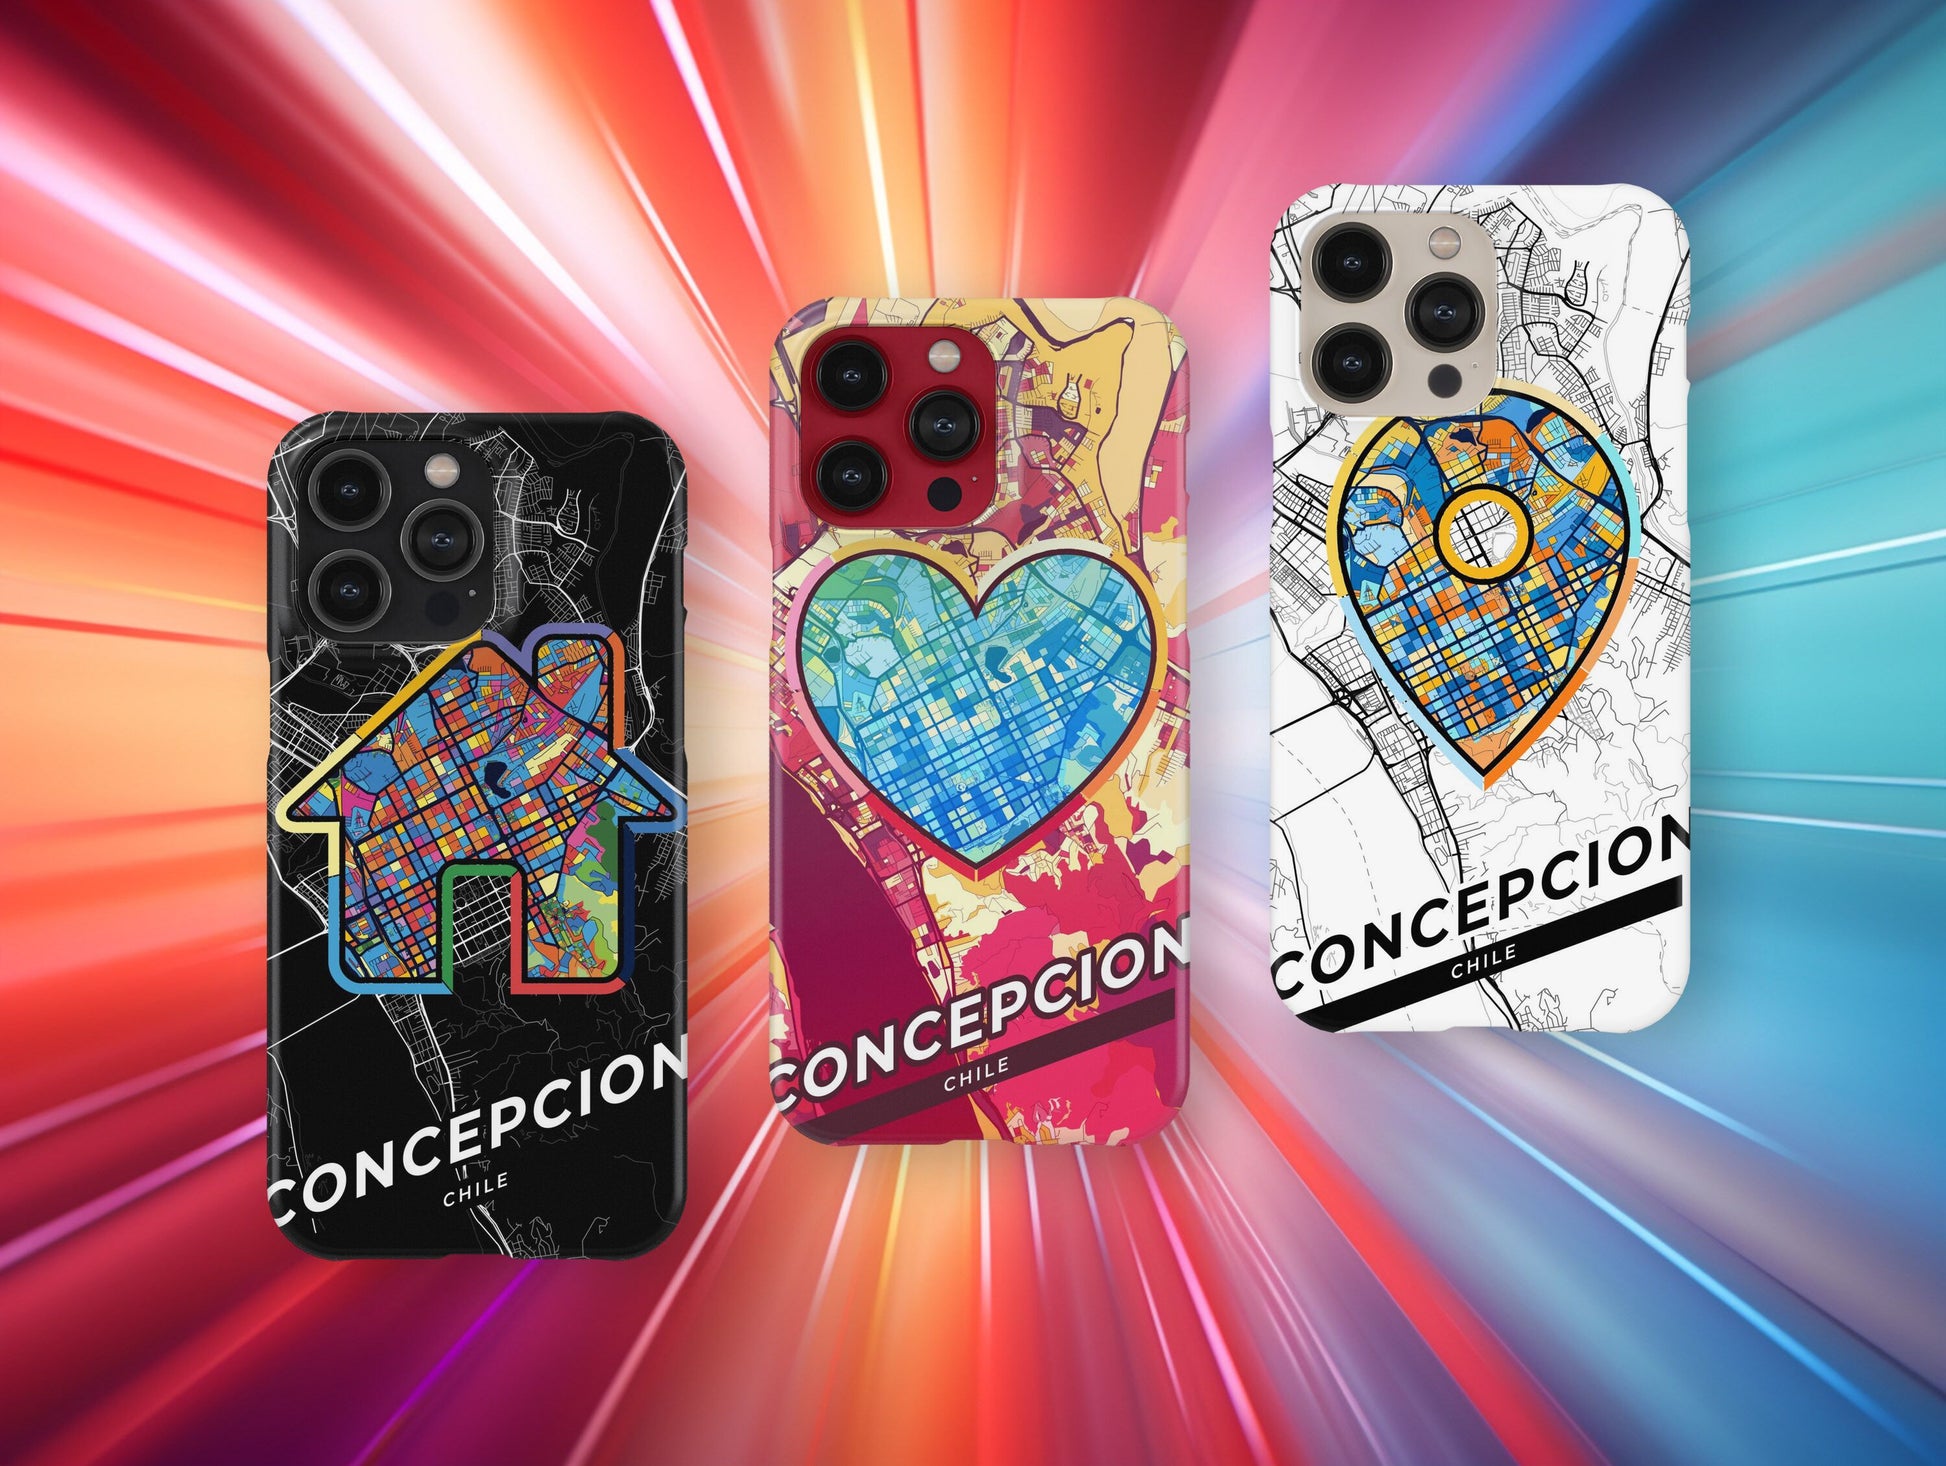 Concepcion Chile slim phone case with colorful icon. Birthday, wedding or housewarming gift. Couple match cases.